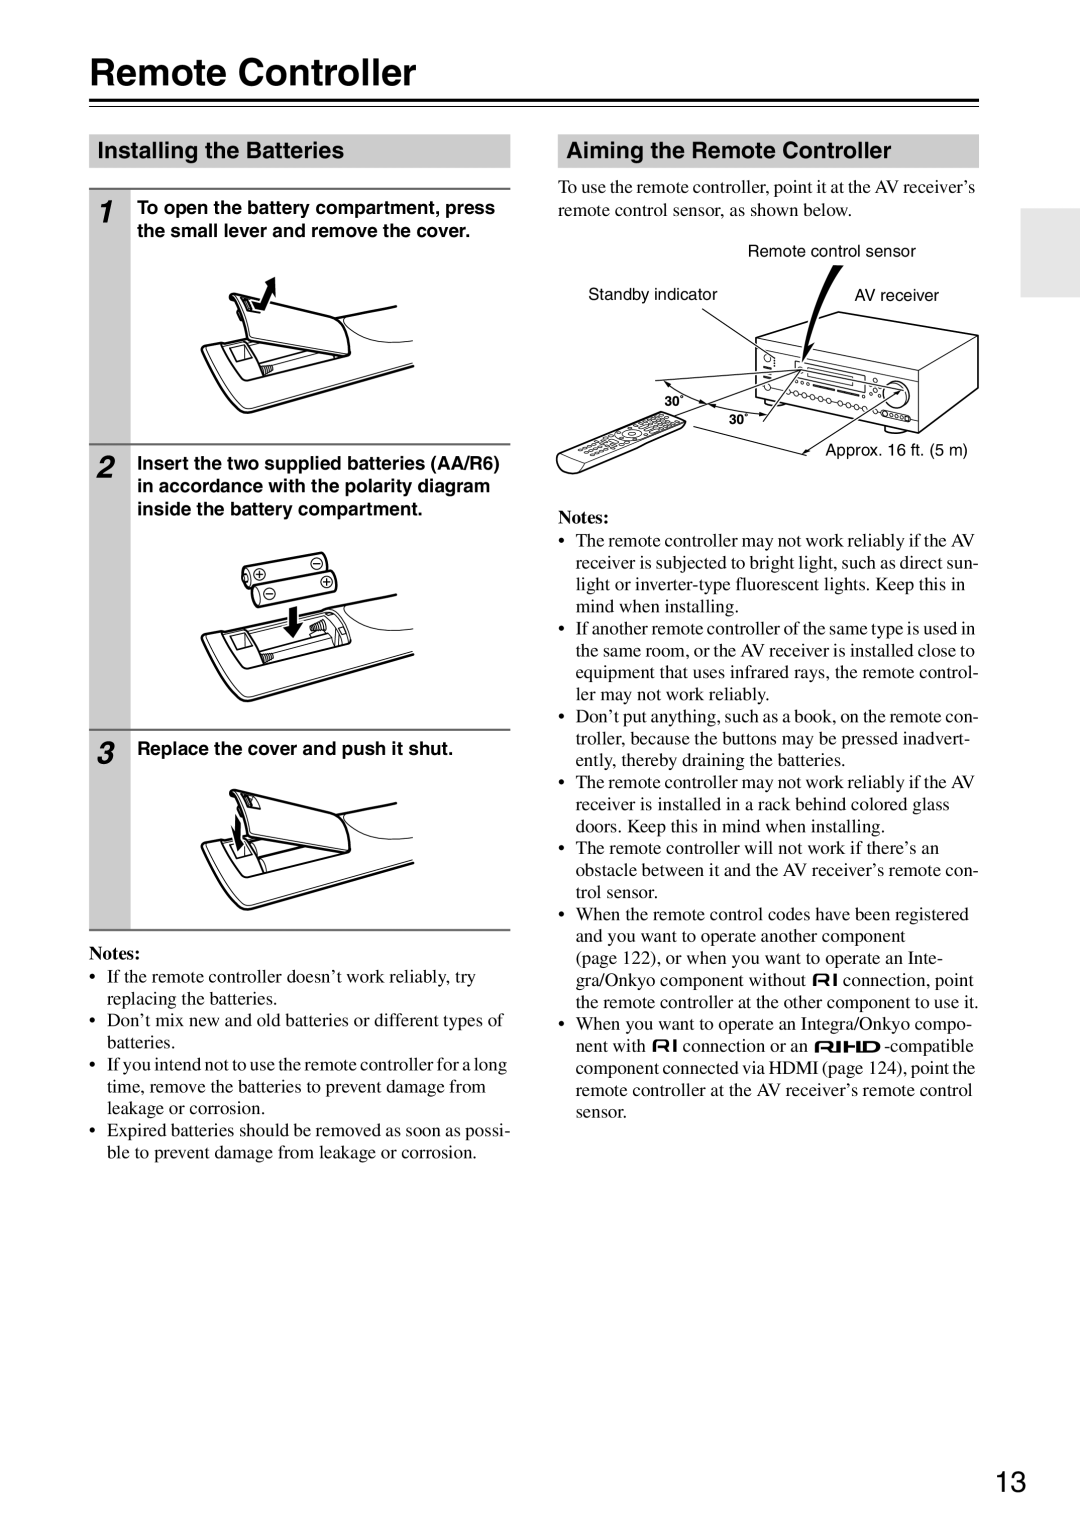 Onkyo DTR-7.9 instruction manual Installing the Batteries, Aiming the Remote Controller, Notes 